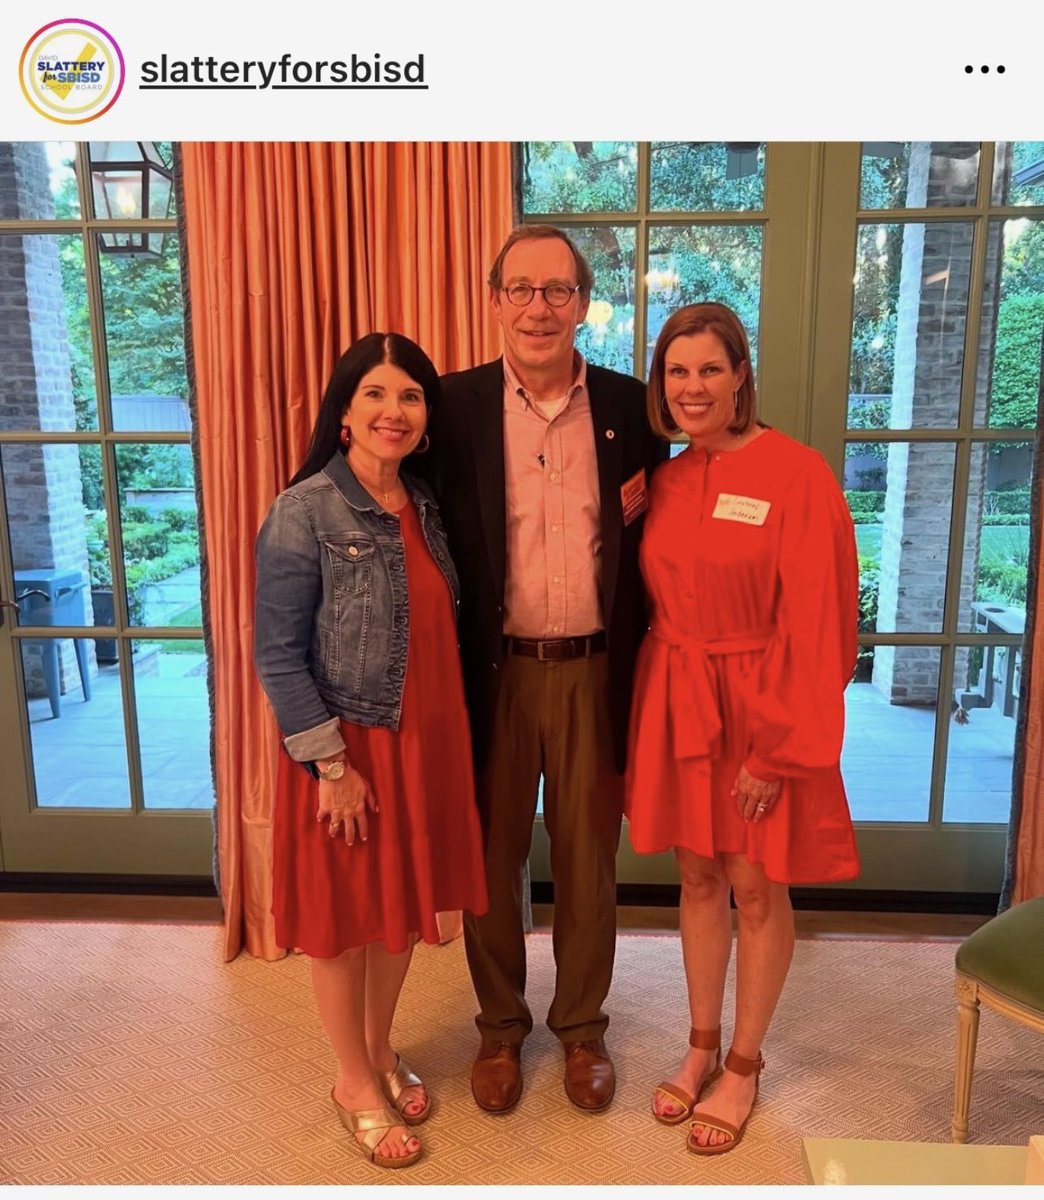 Not shocking knowing what I know. Why are two current trustees of @SBISD, Lisa Alpe and Courtney Anderson, apparently supporting Slattery, who also endorsed & supported Virginia Elizondo, who is still currently suing SBISD? 
Vote for @MattCone4SBISD